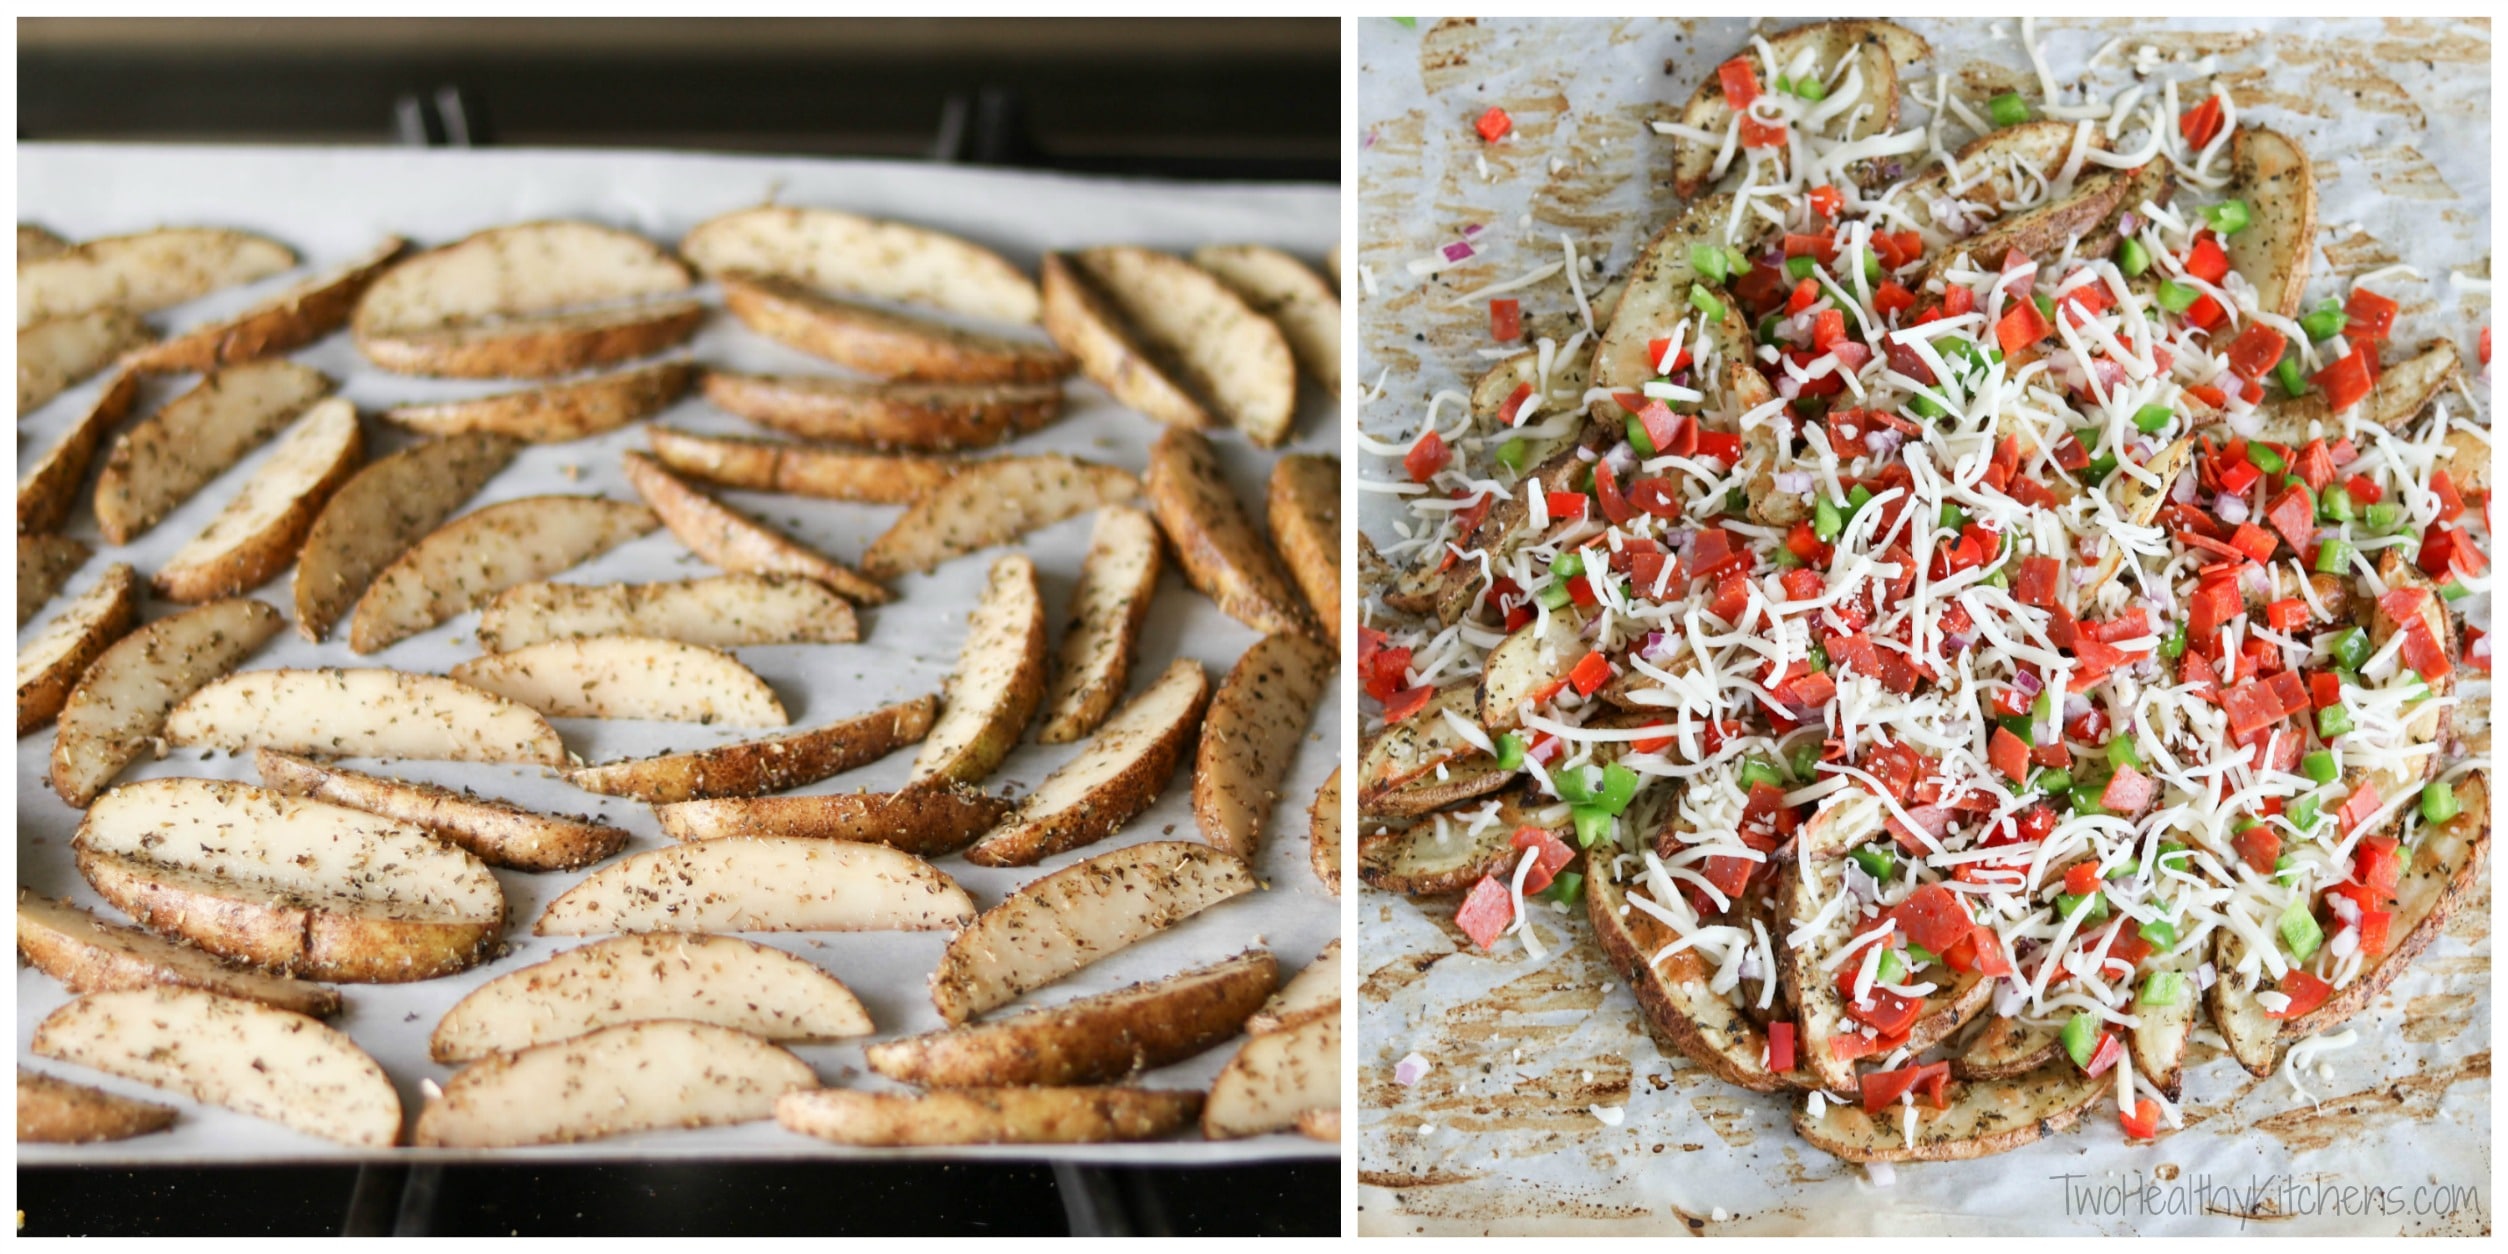 Horizontal collage of seasoned fries on baking sheet and then loaded with toppings before final baking.